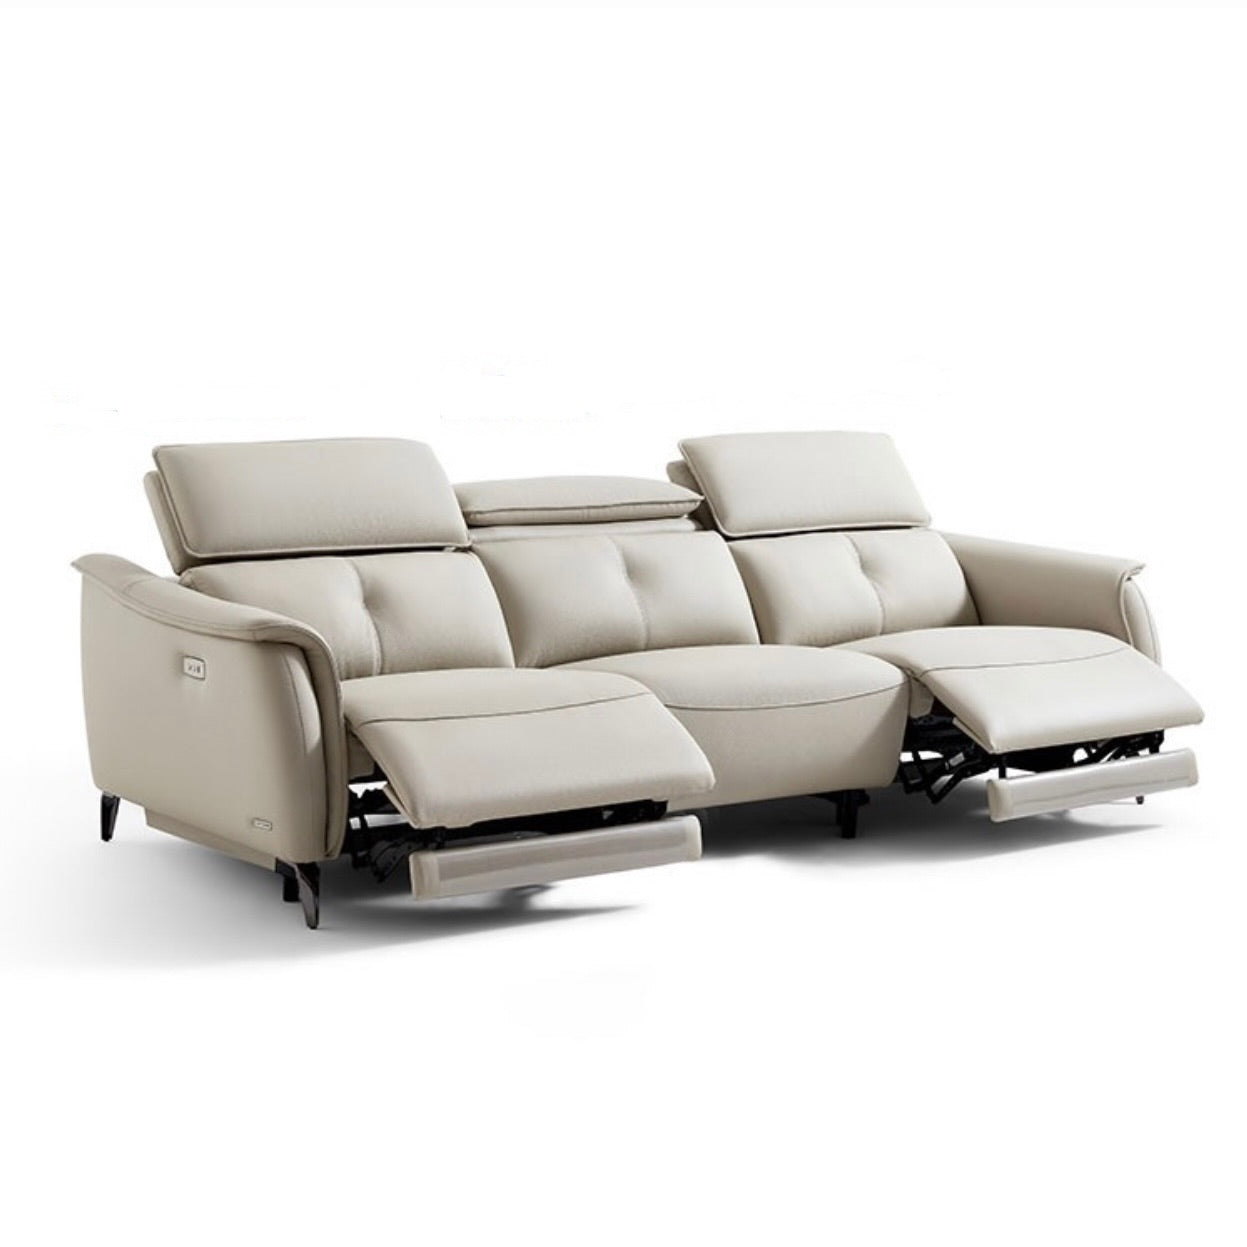 Talya Leather Recliner 3 seater